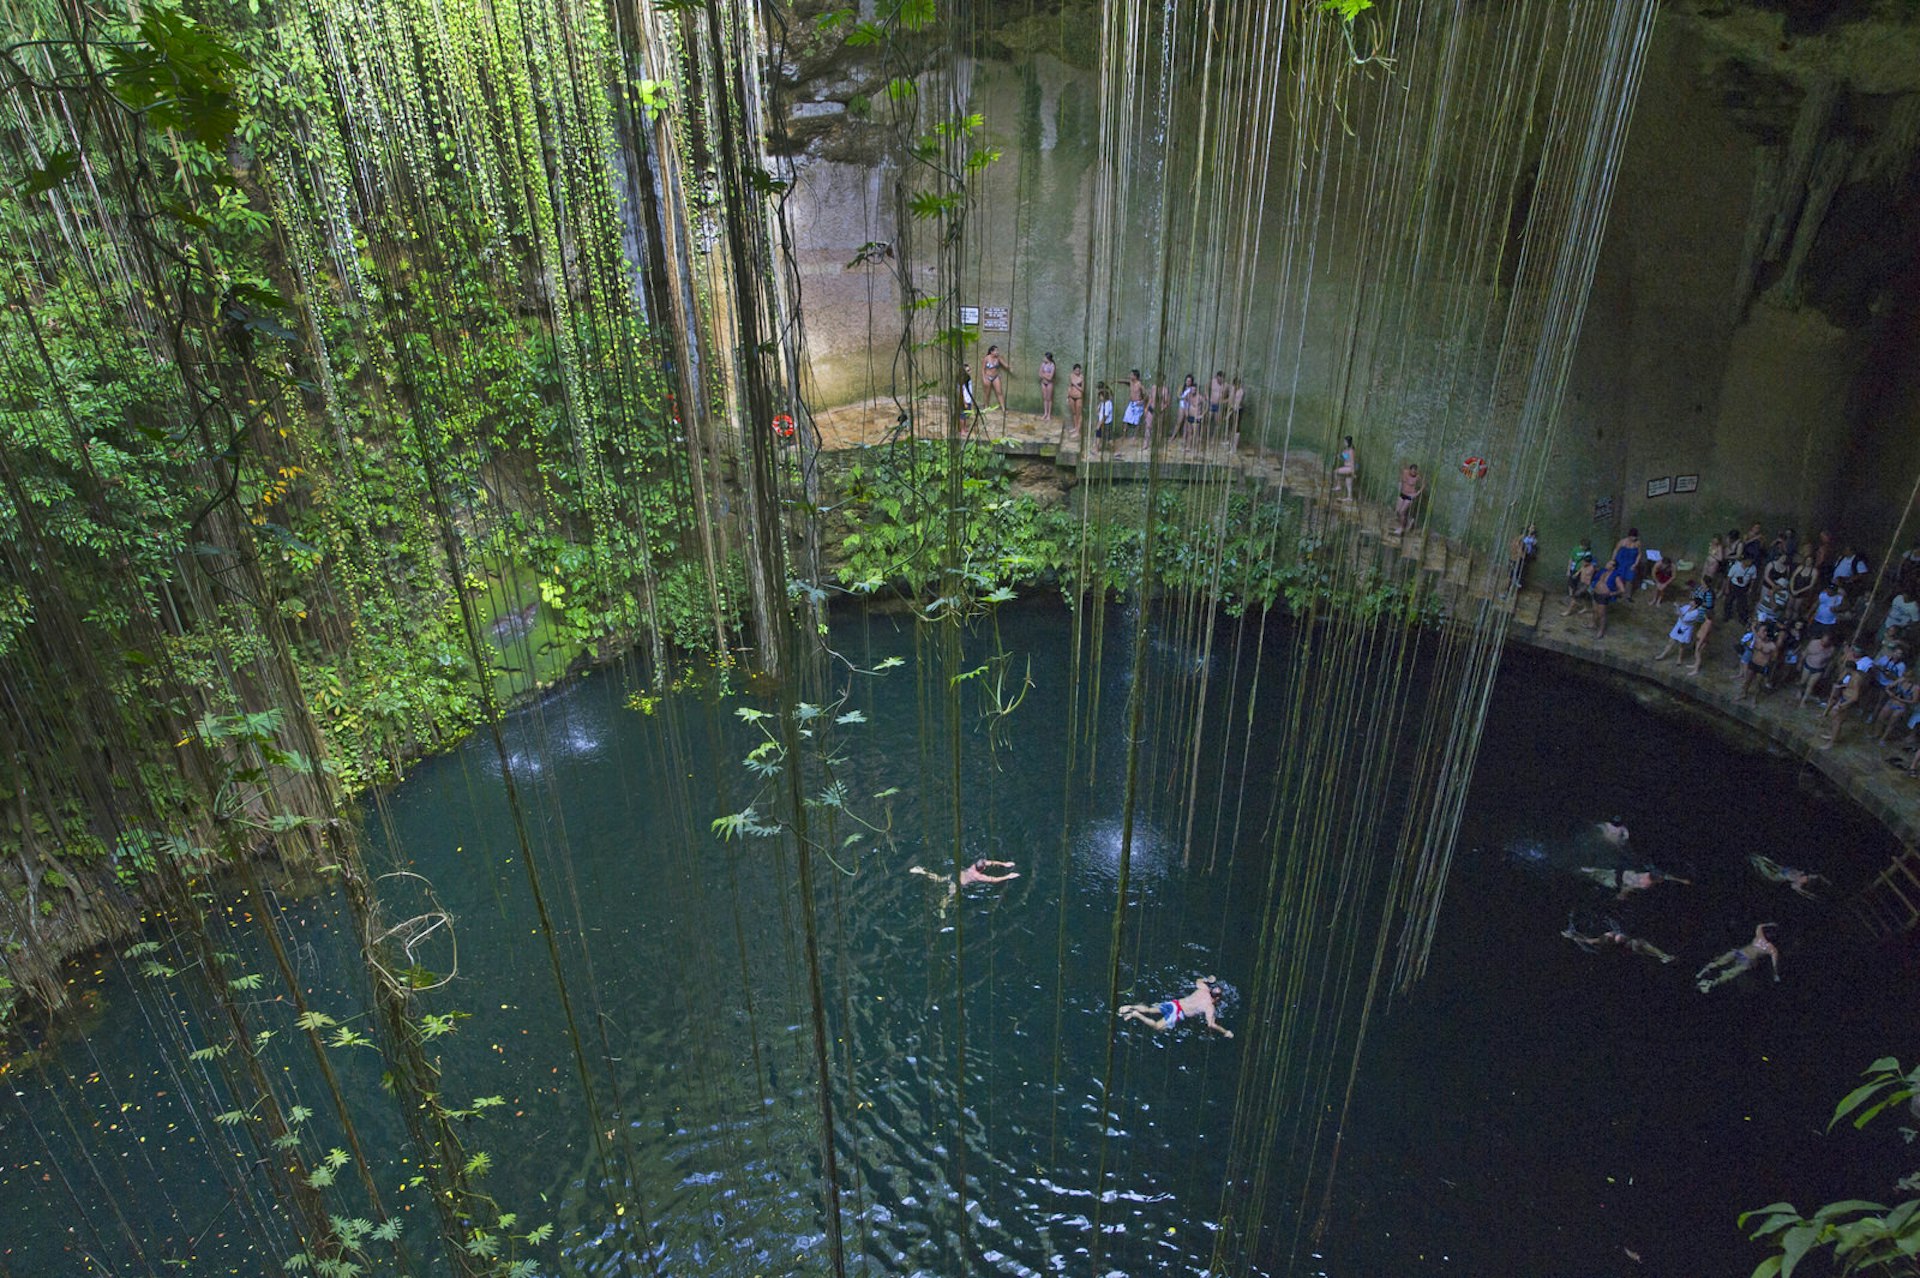 A view of a Mexican cenote from above as people queue to jump in